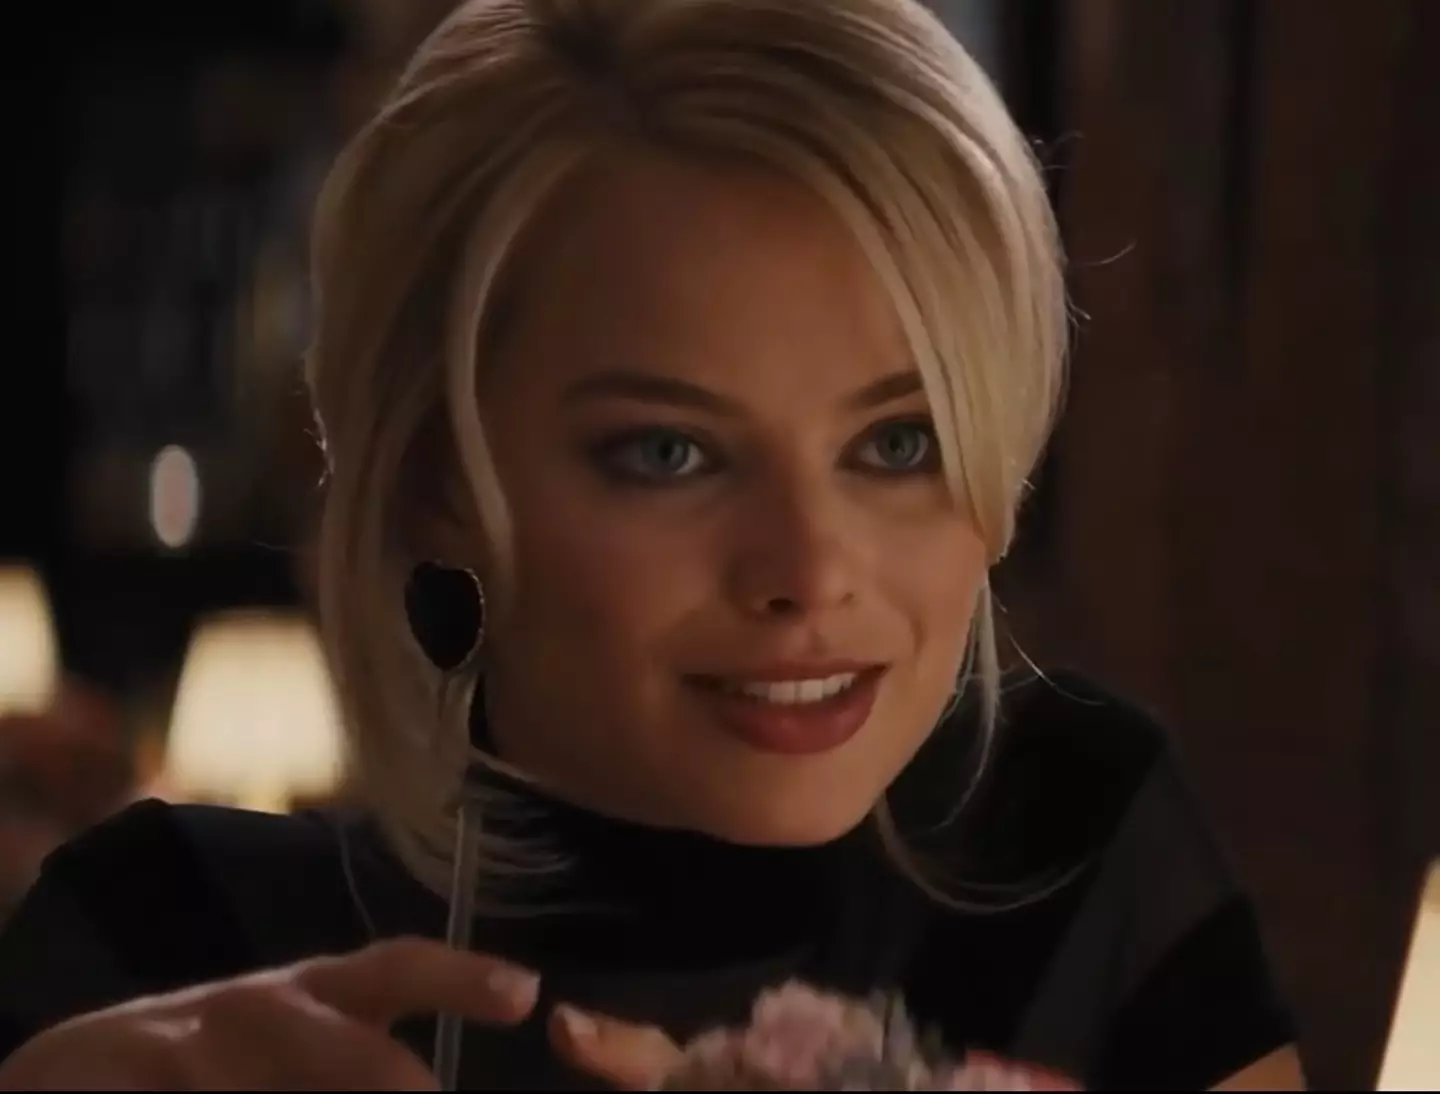 Margot Robbie turned down the option to wear a robe in her nude scene.